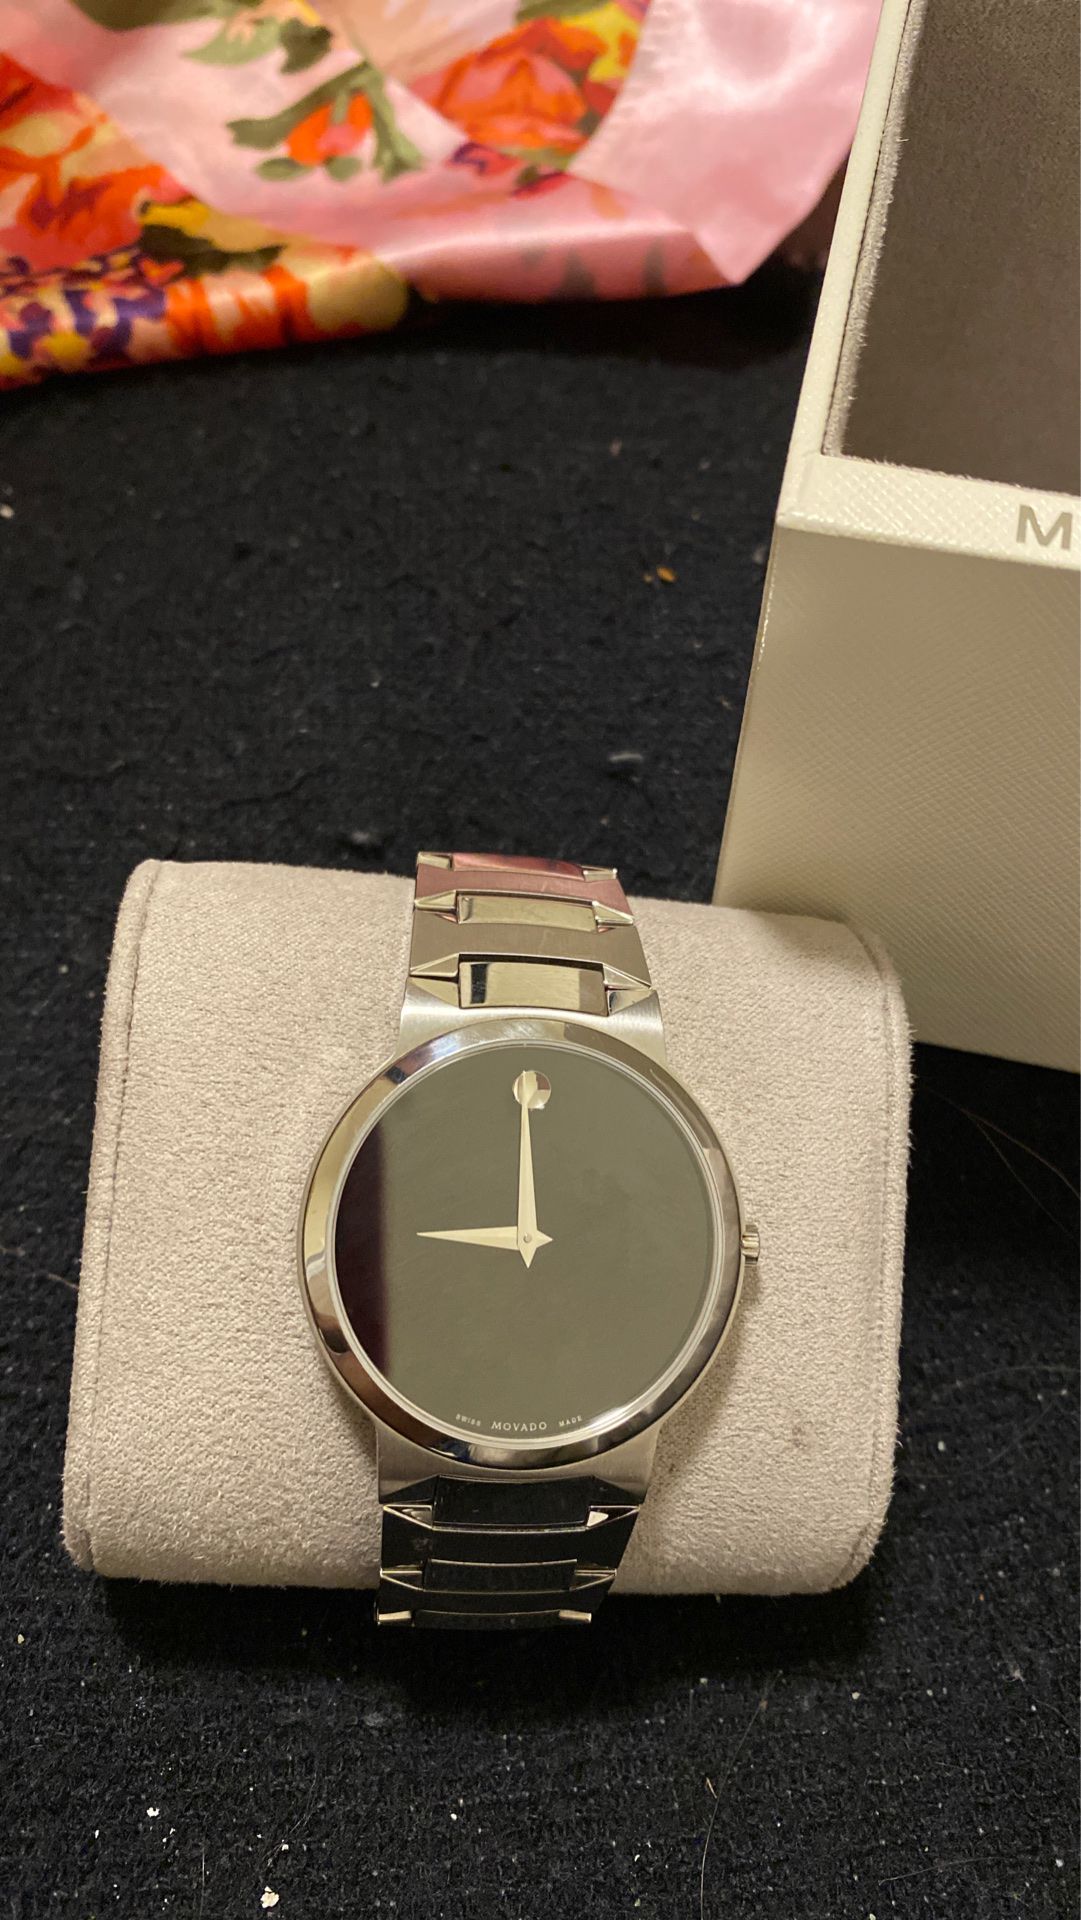 Movado sapphire crystal Swiss made watches